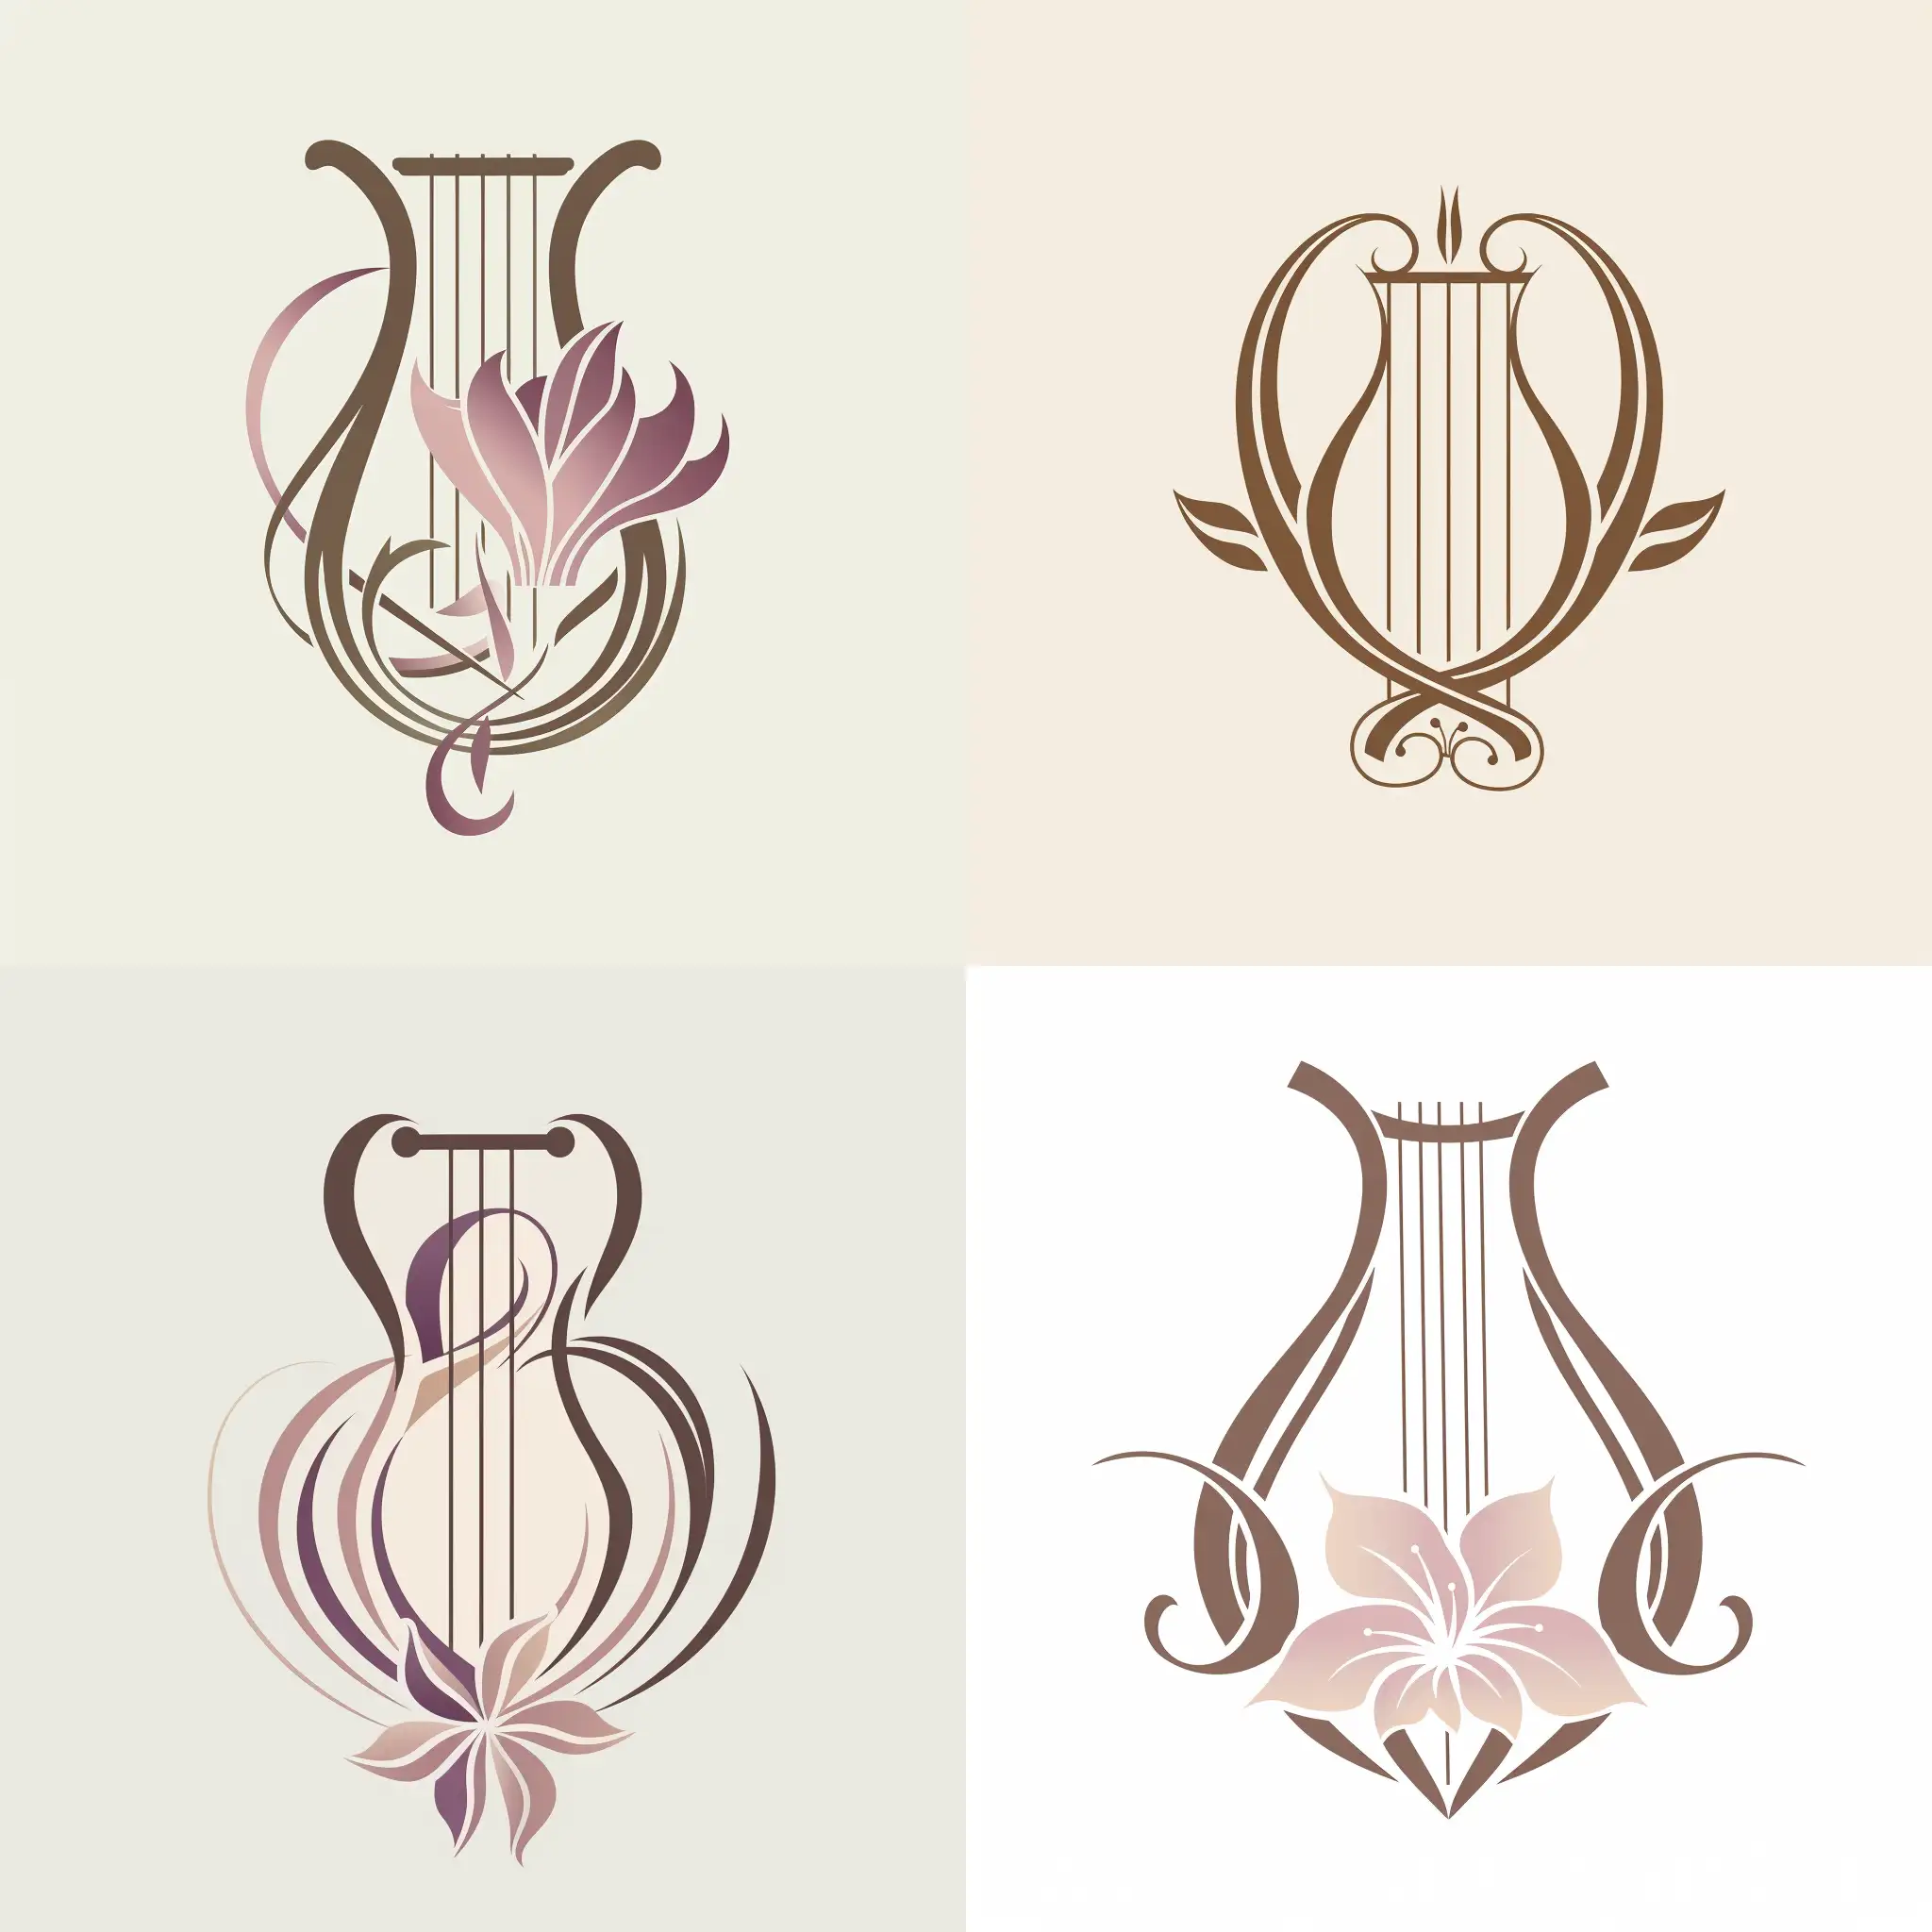 Sophisticated-Lyre-and-Flower-Logo-for-Music-and-Arts-Organizations